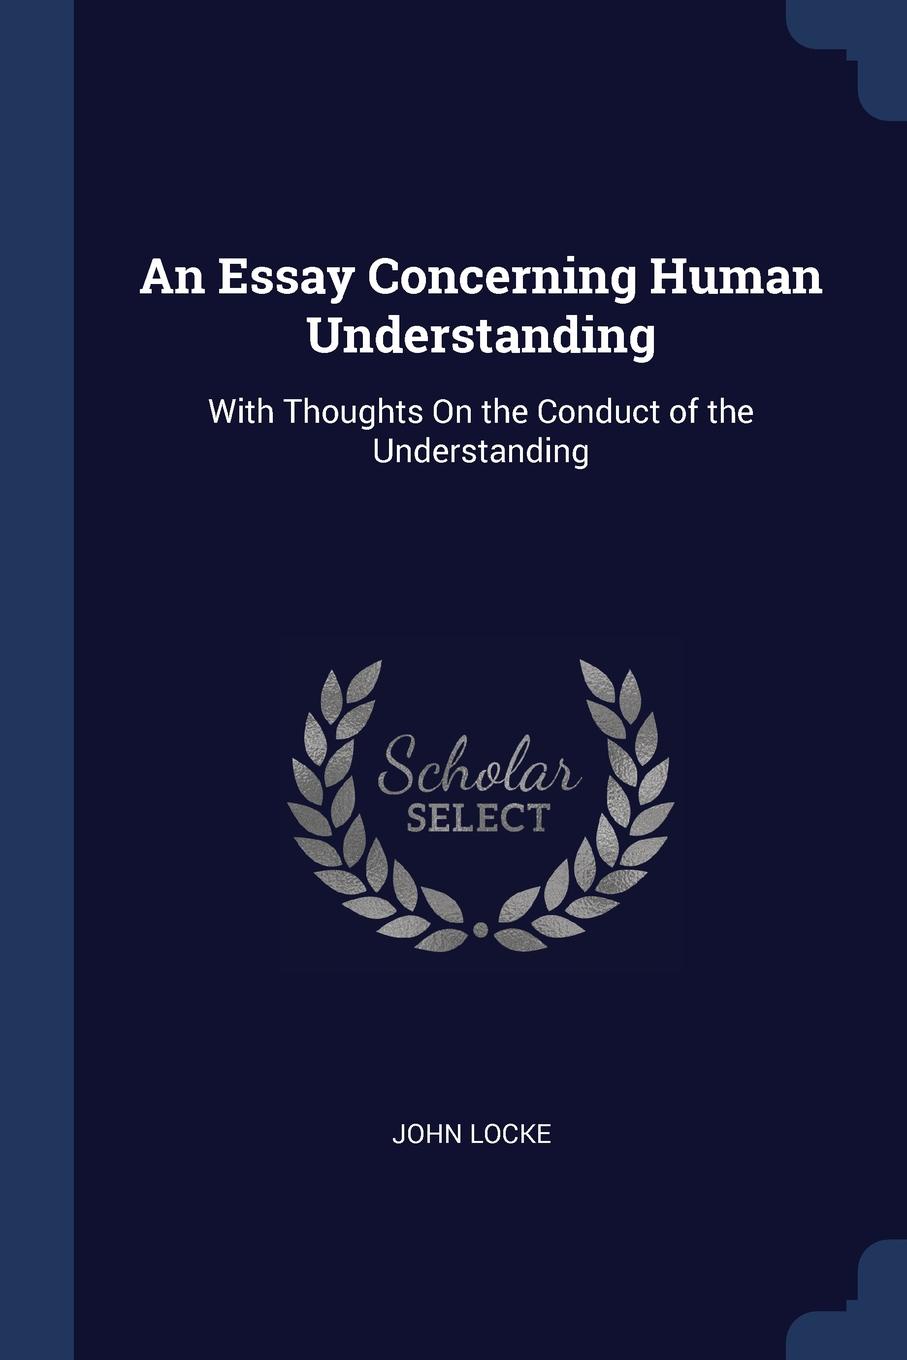 An Essay Concerning Human Understanding. With Thoughts On the Conduct of the Understanding